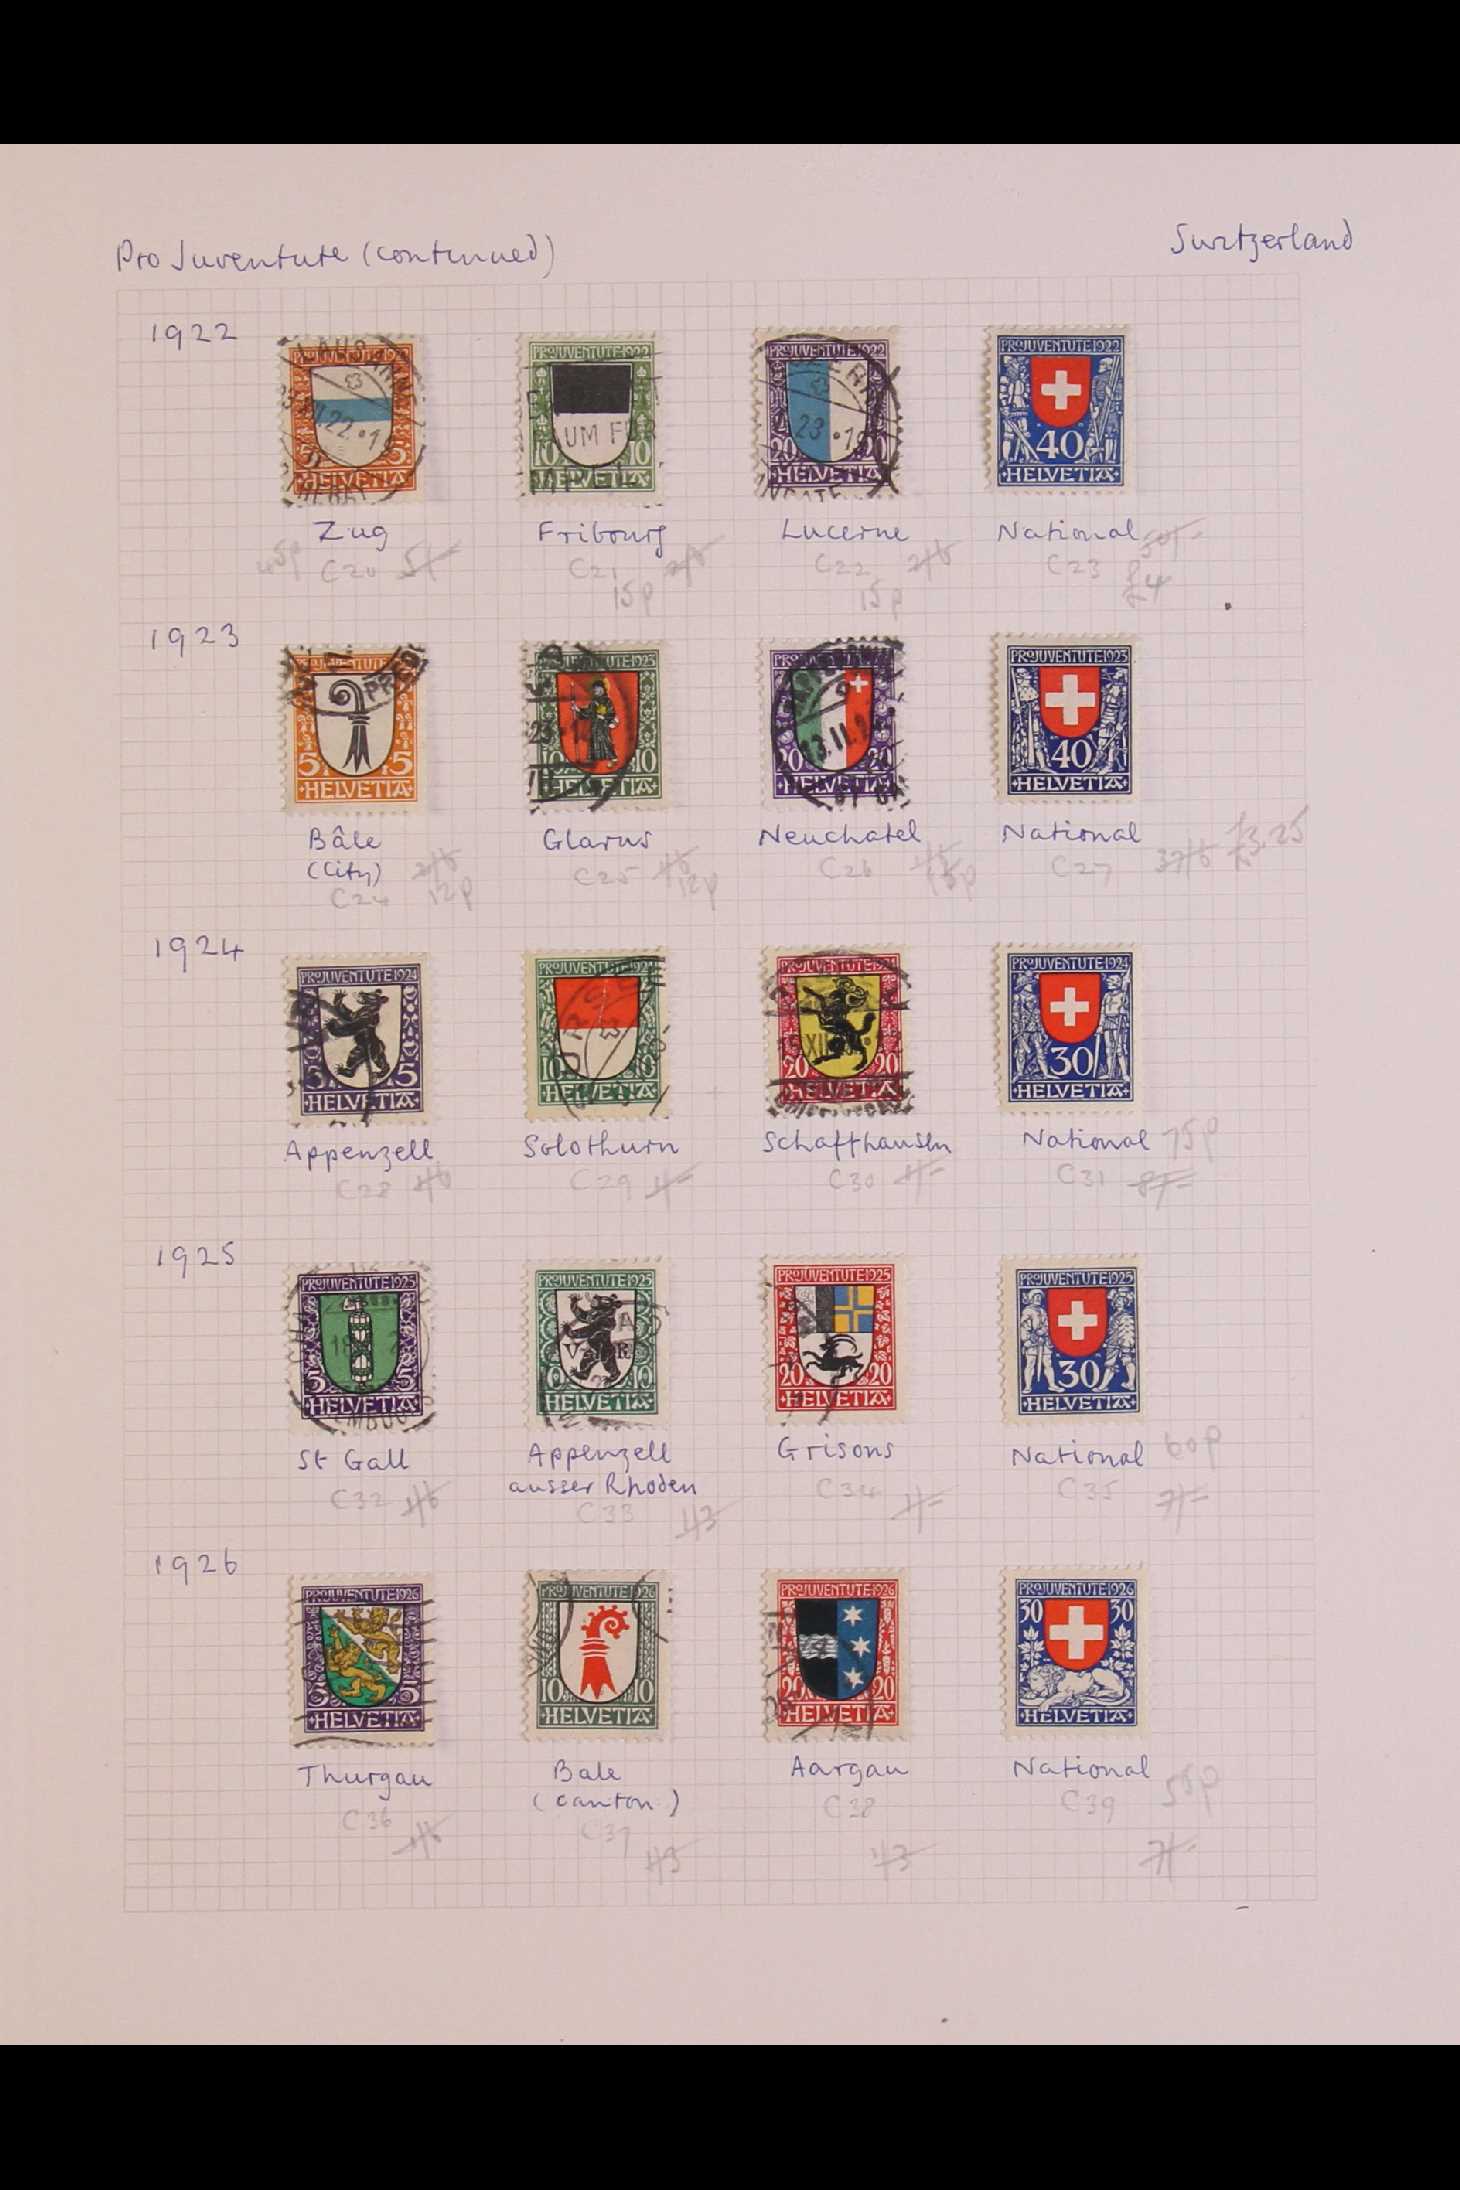 SWITZERLAND 1850 - 1959 COLLECTION of chiefly used stamps on leaves, incl 1850 5r & 10r, 1851 5r, - Image 13 of 17